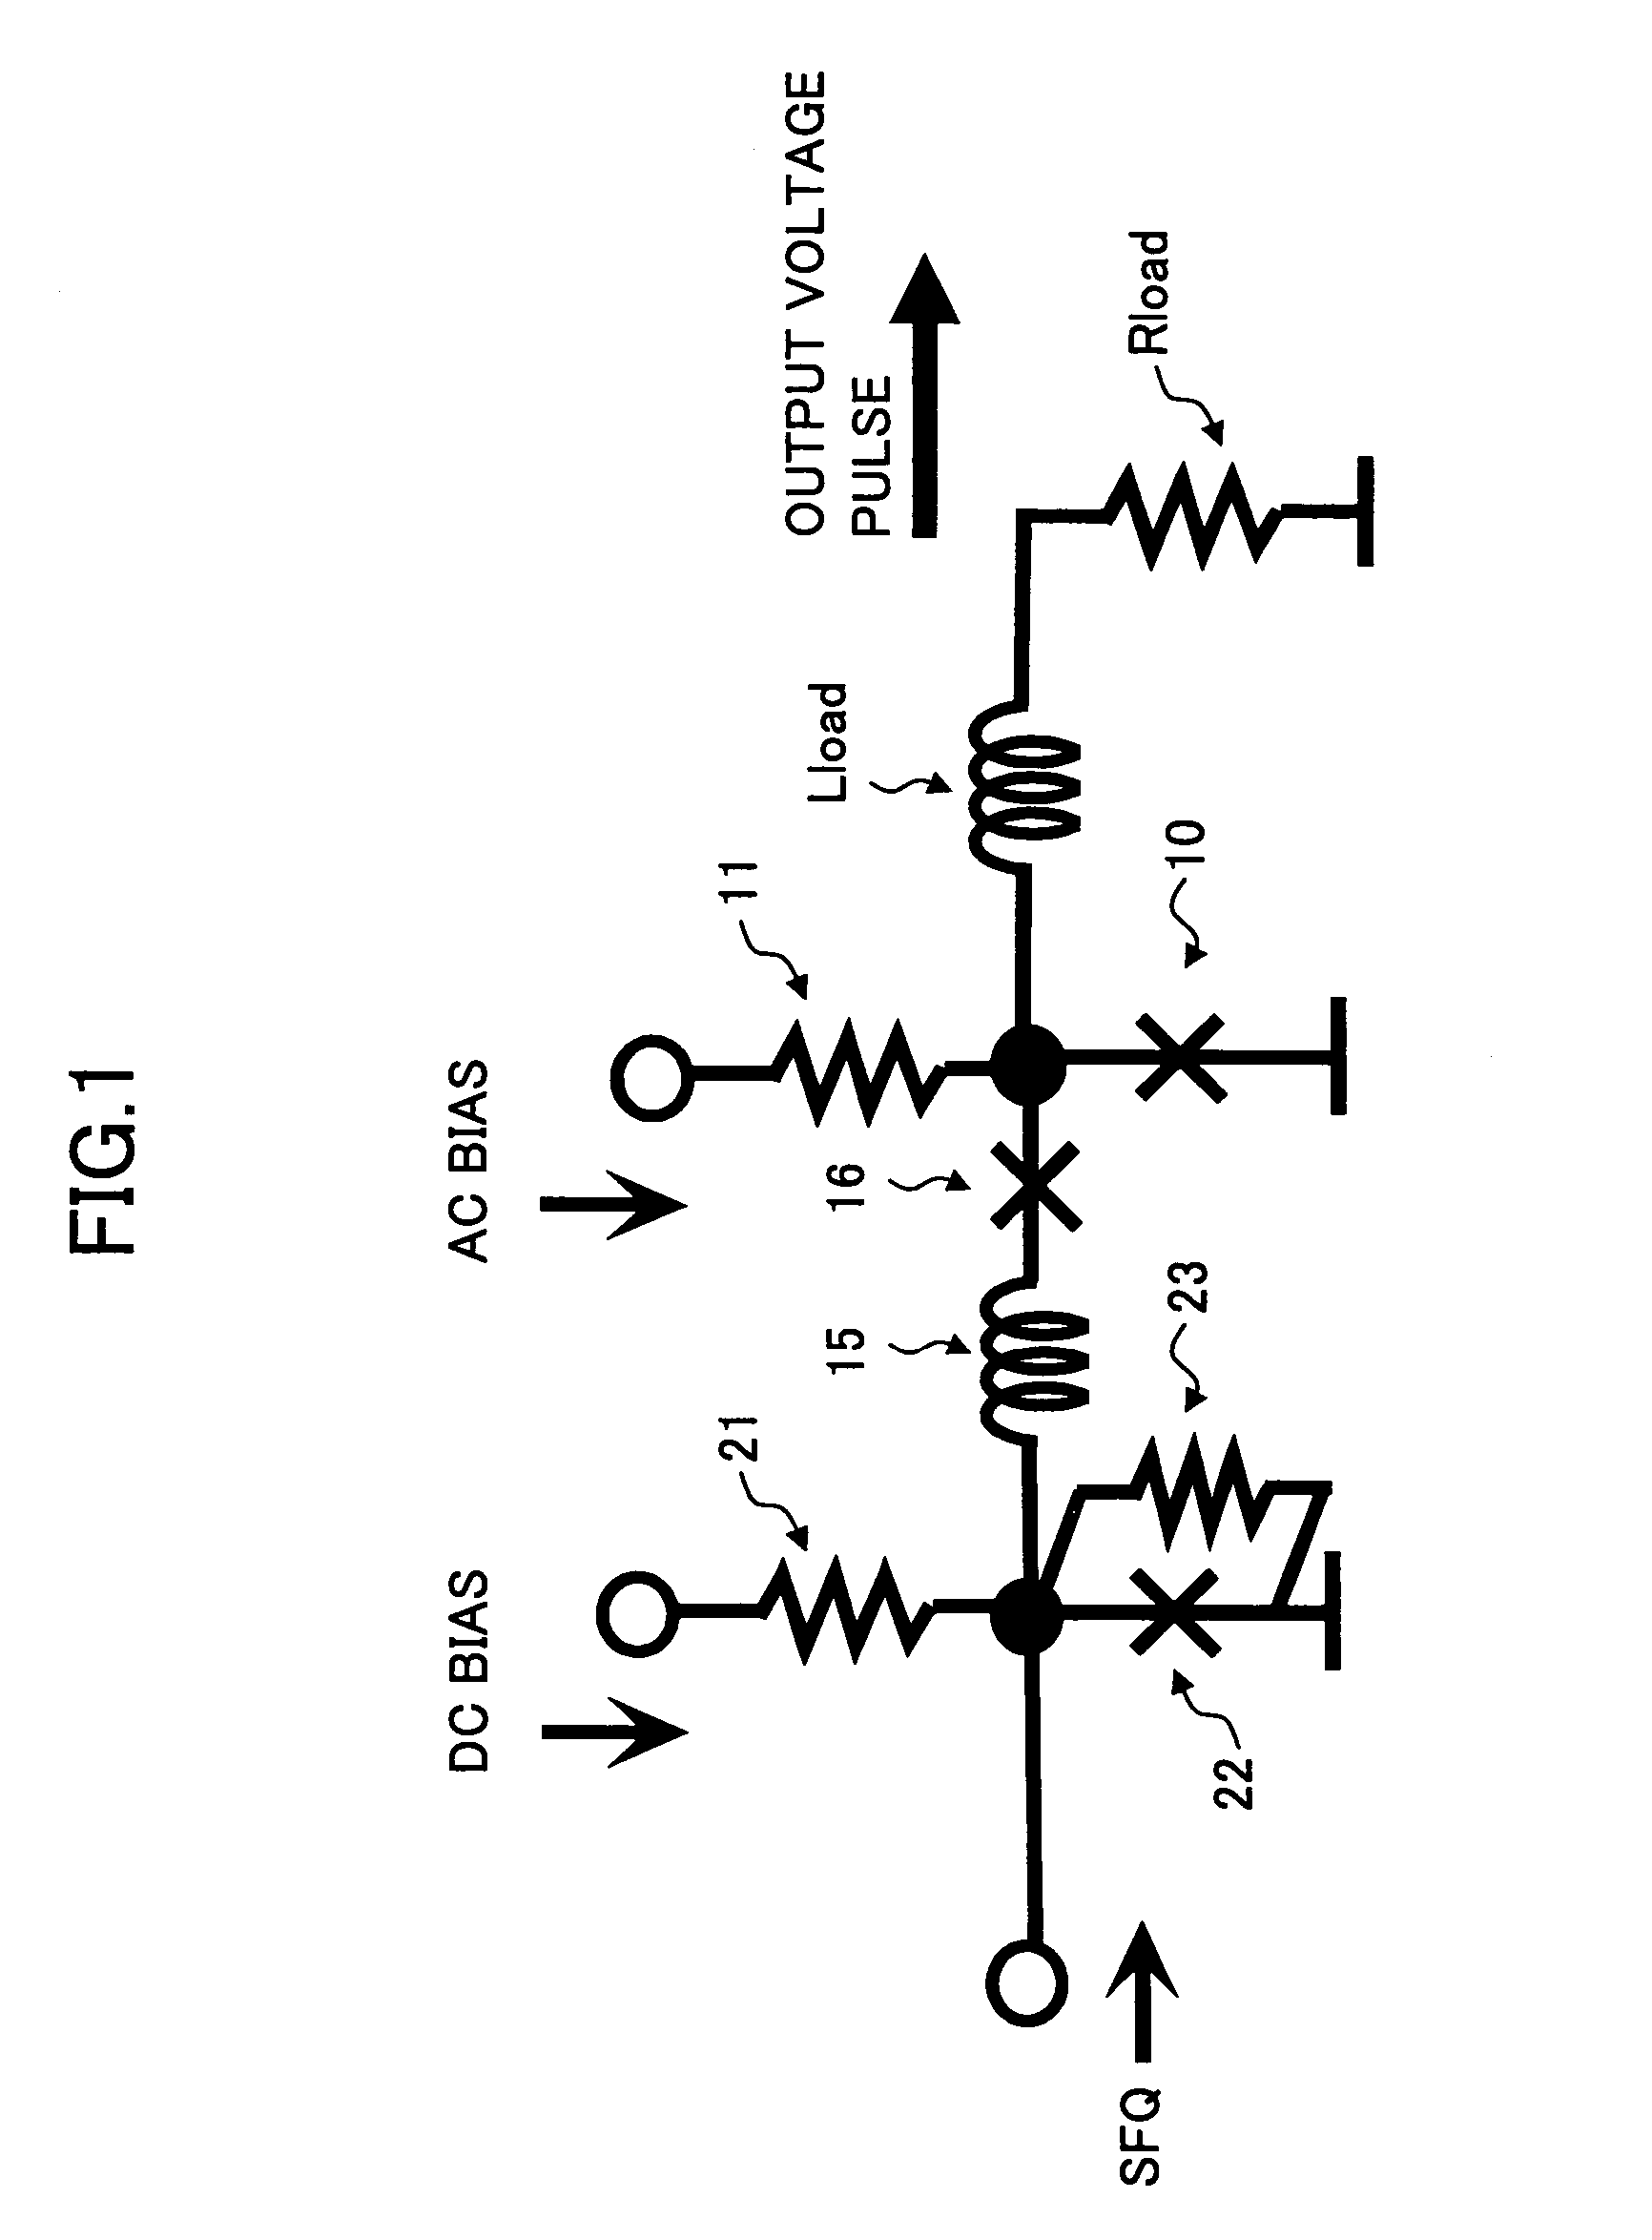 Superconducting latch driver circuit generating sufficient output voltage and pulse-width